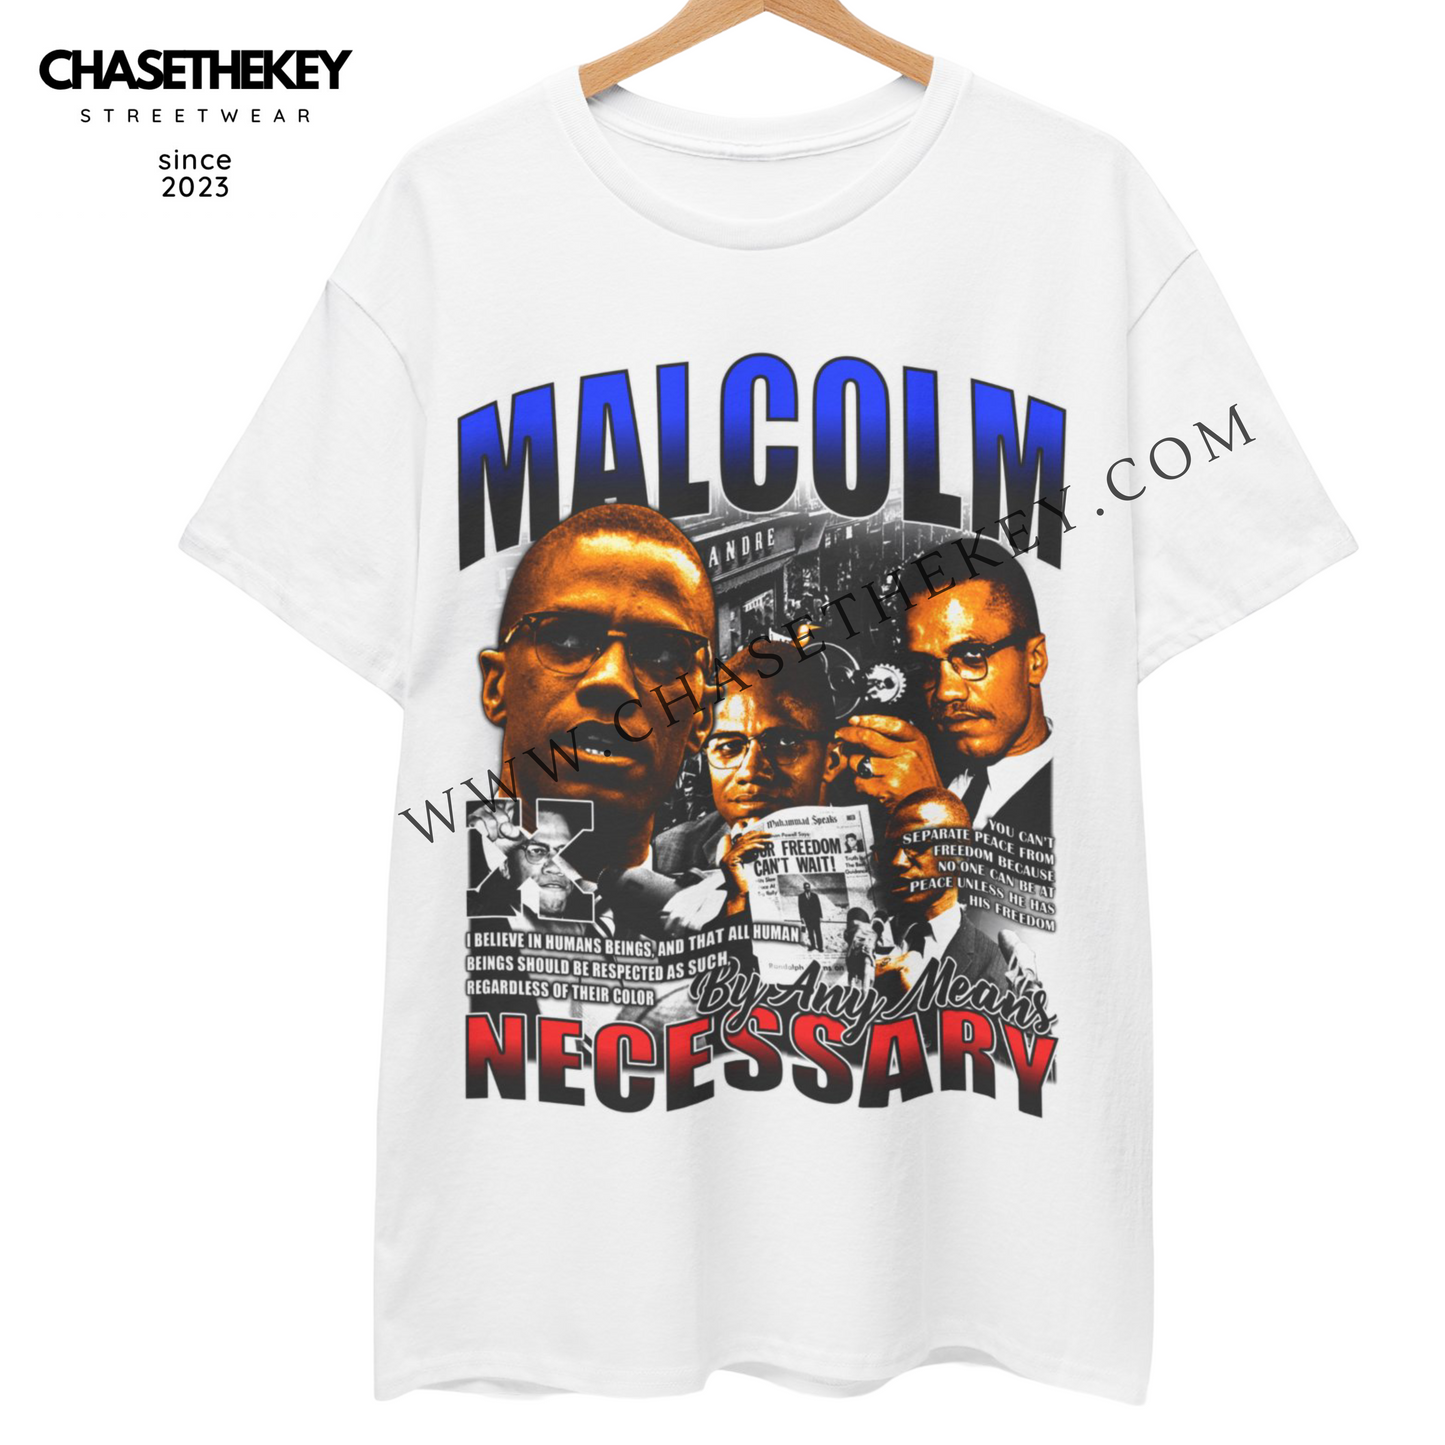 Malcolm X By Any Means Necessary Shirt